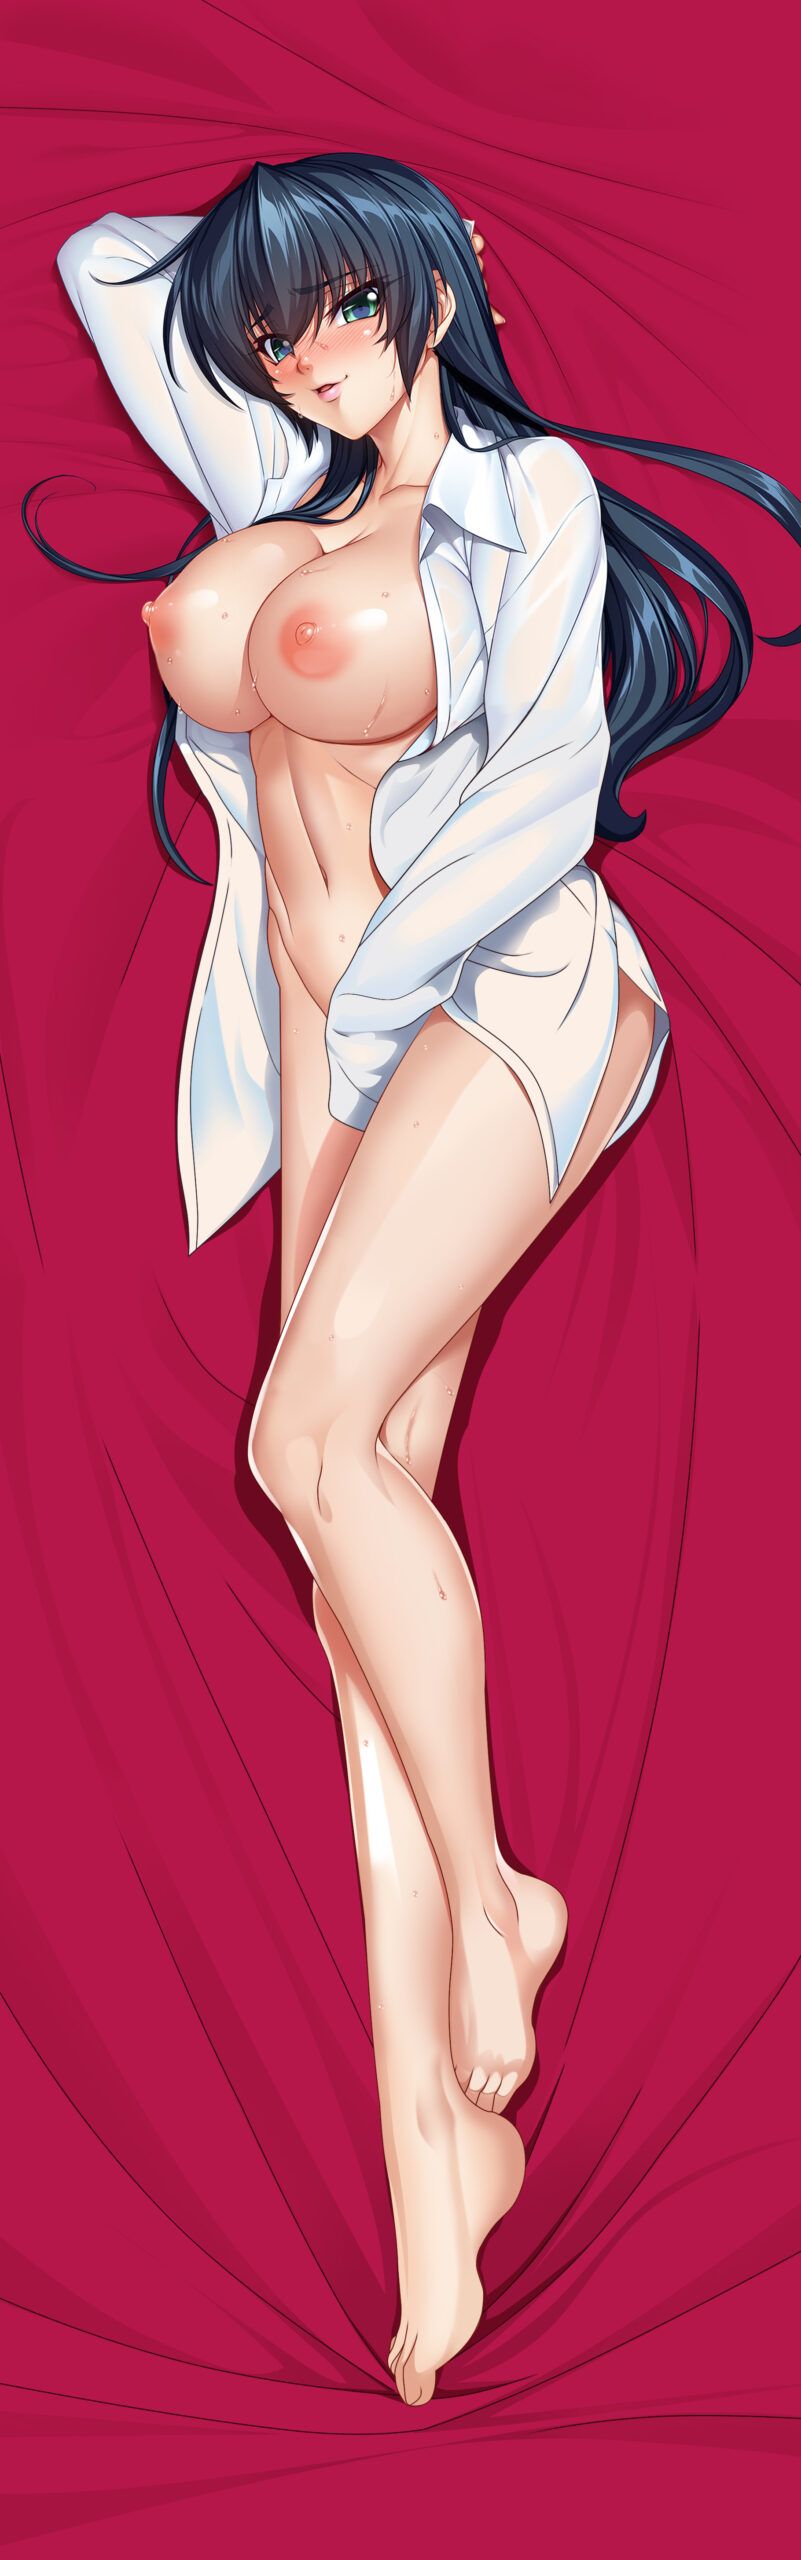 【Hugging Pillow】Images of erotic hugging pillowcases from anime and video games Part 144 1